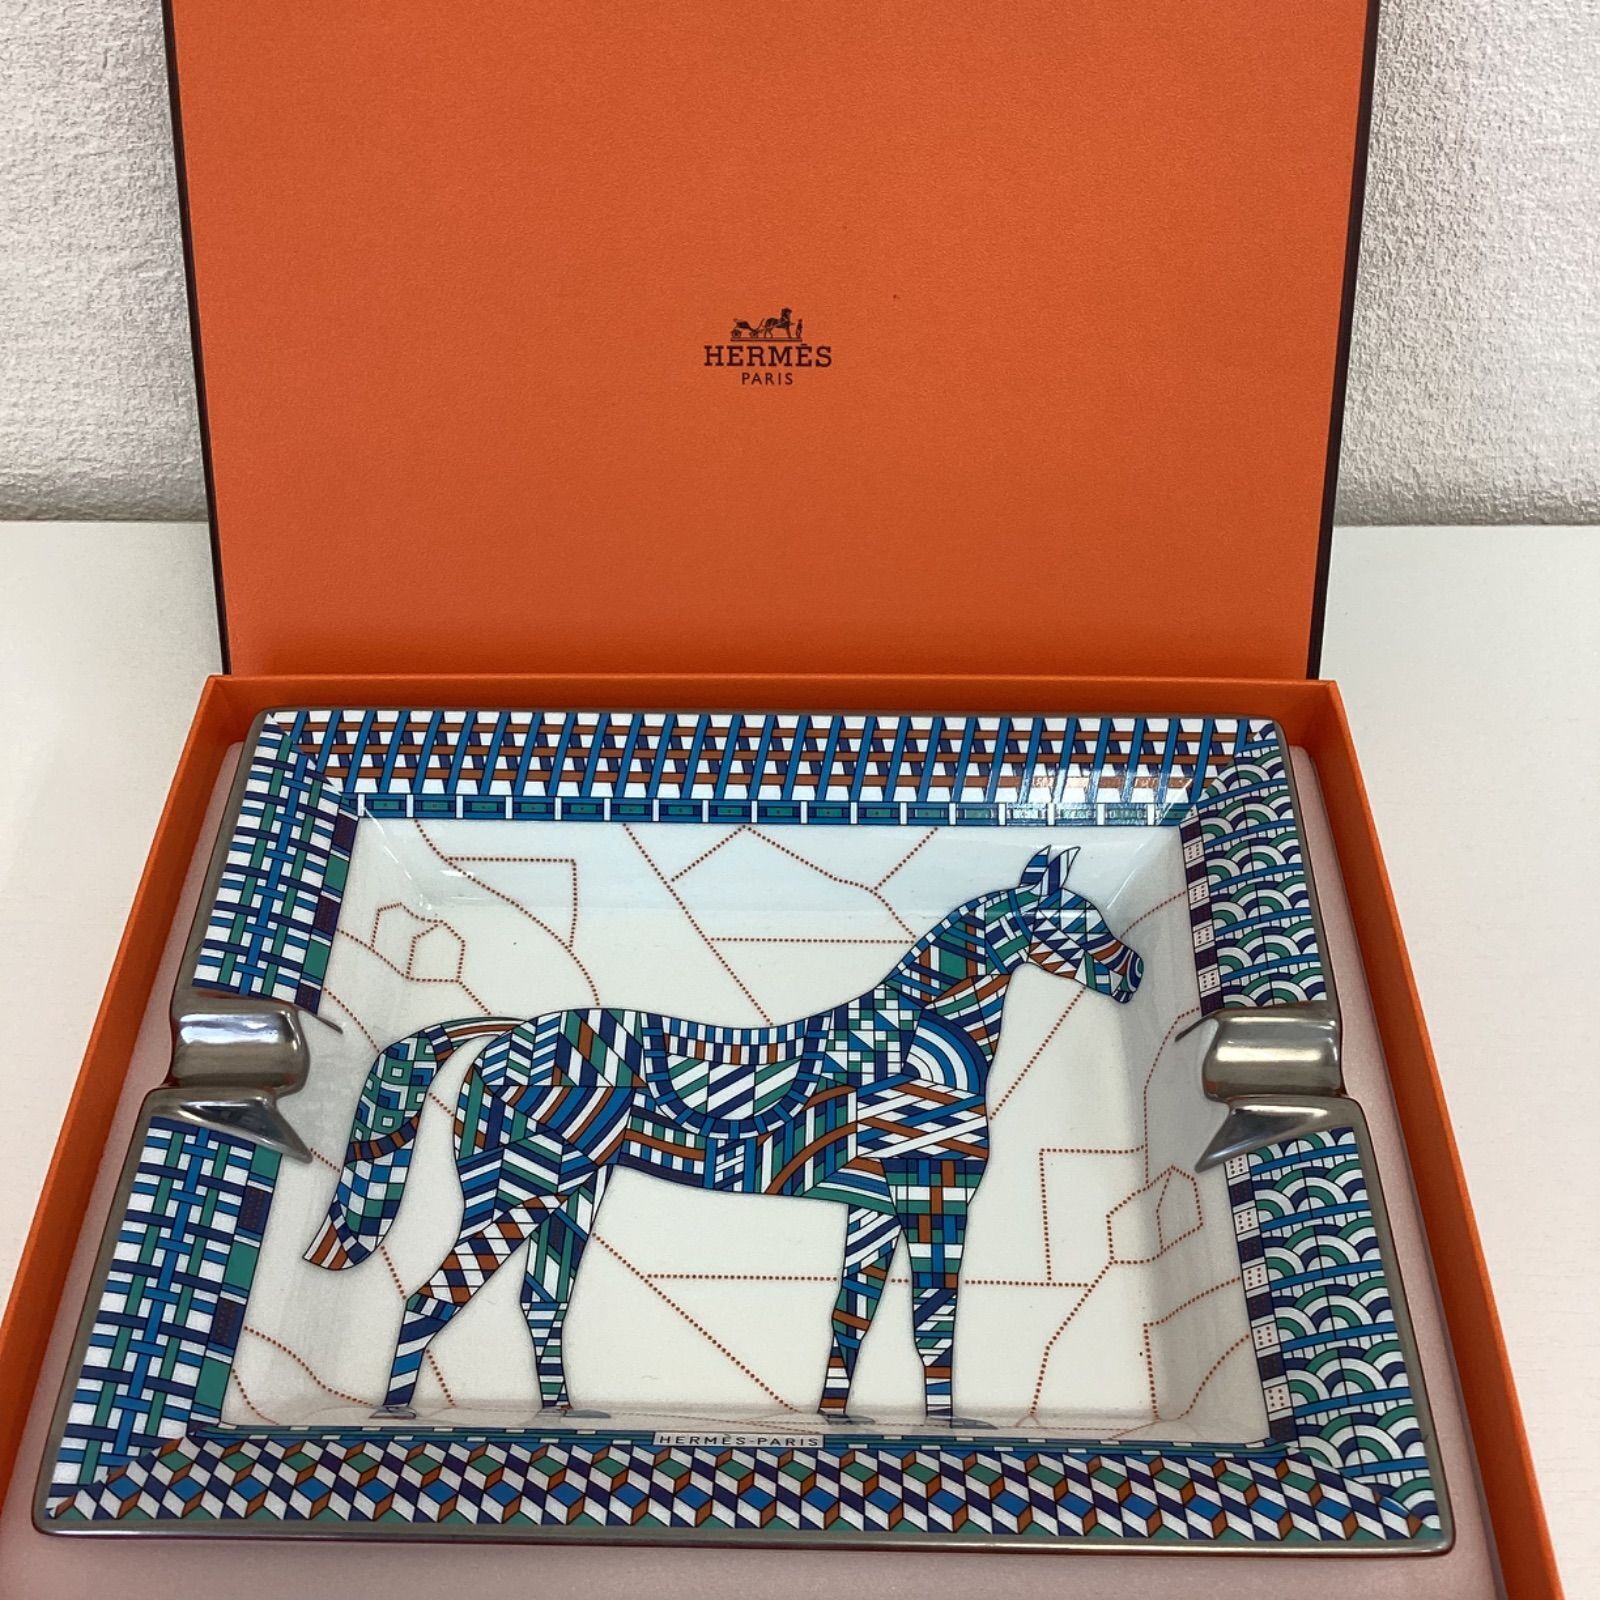 Hermes Paris Ashtray cheval deco Horse Animal Plate Dish Porcelain Tray with box